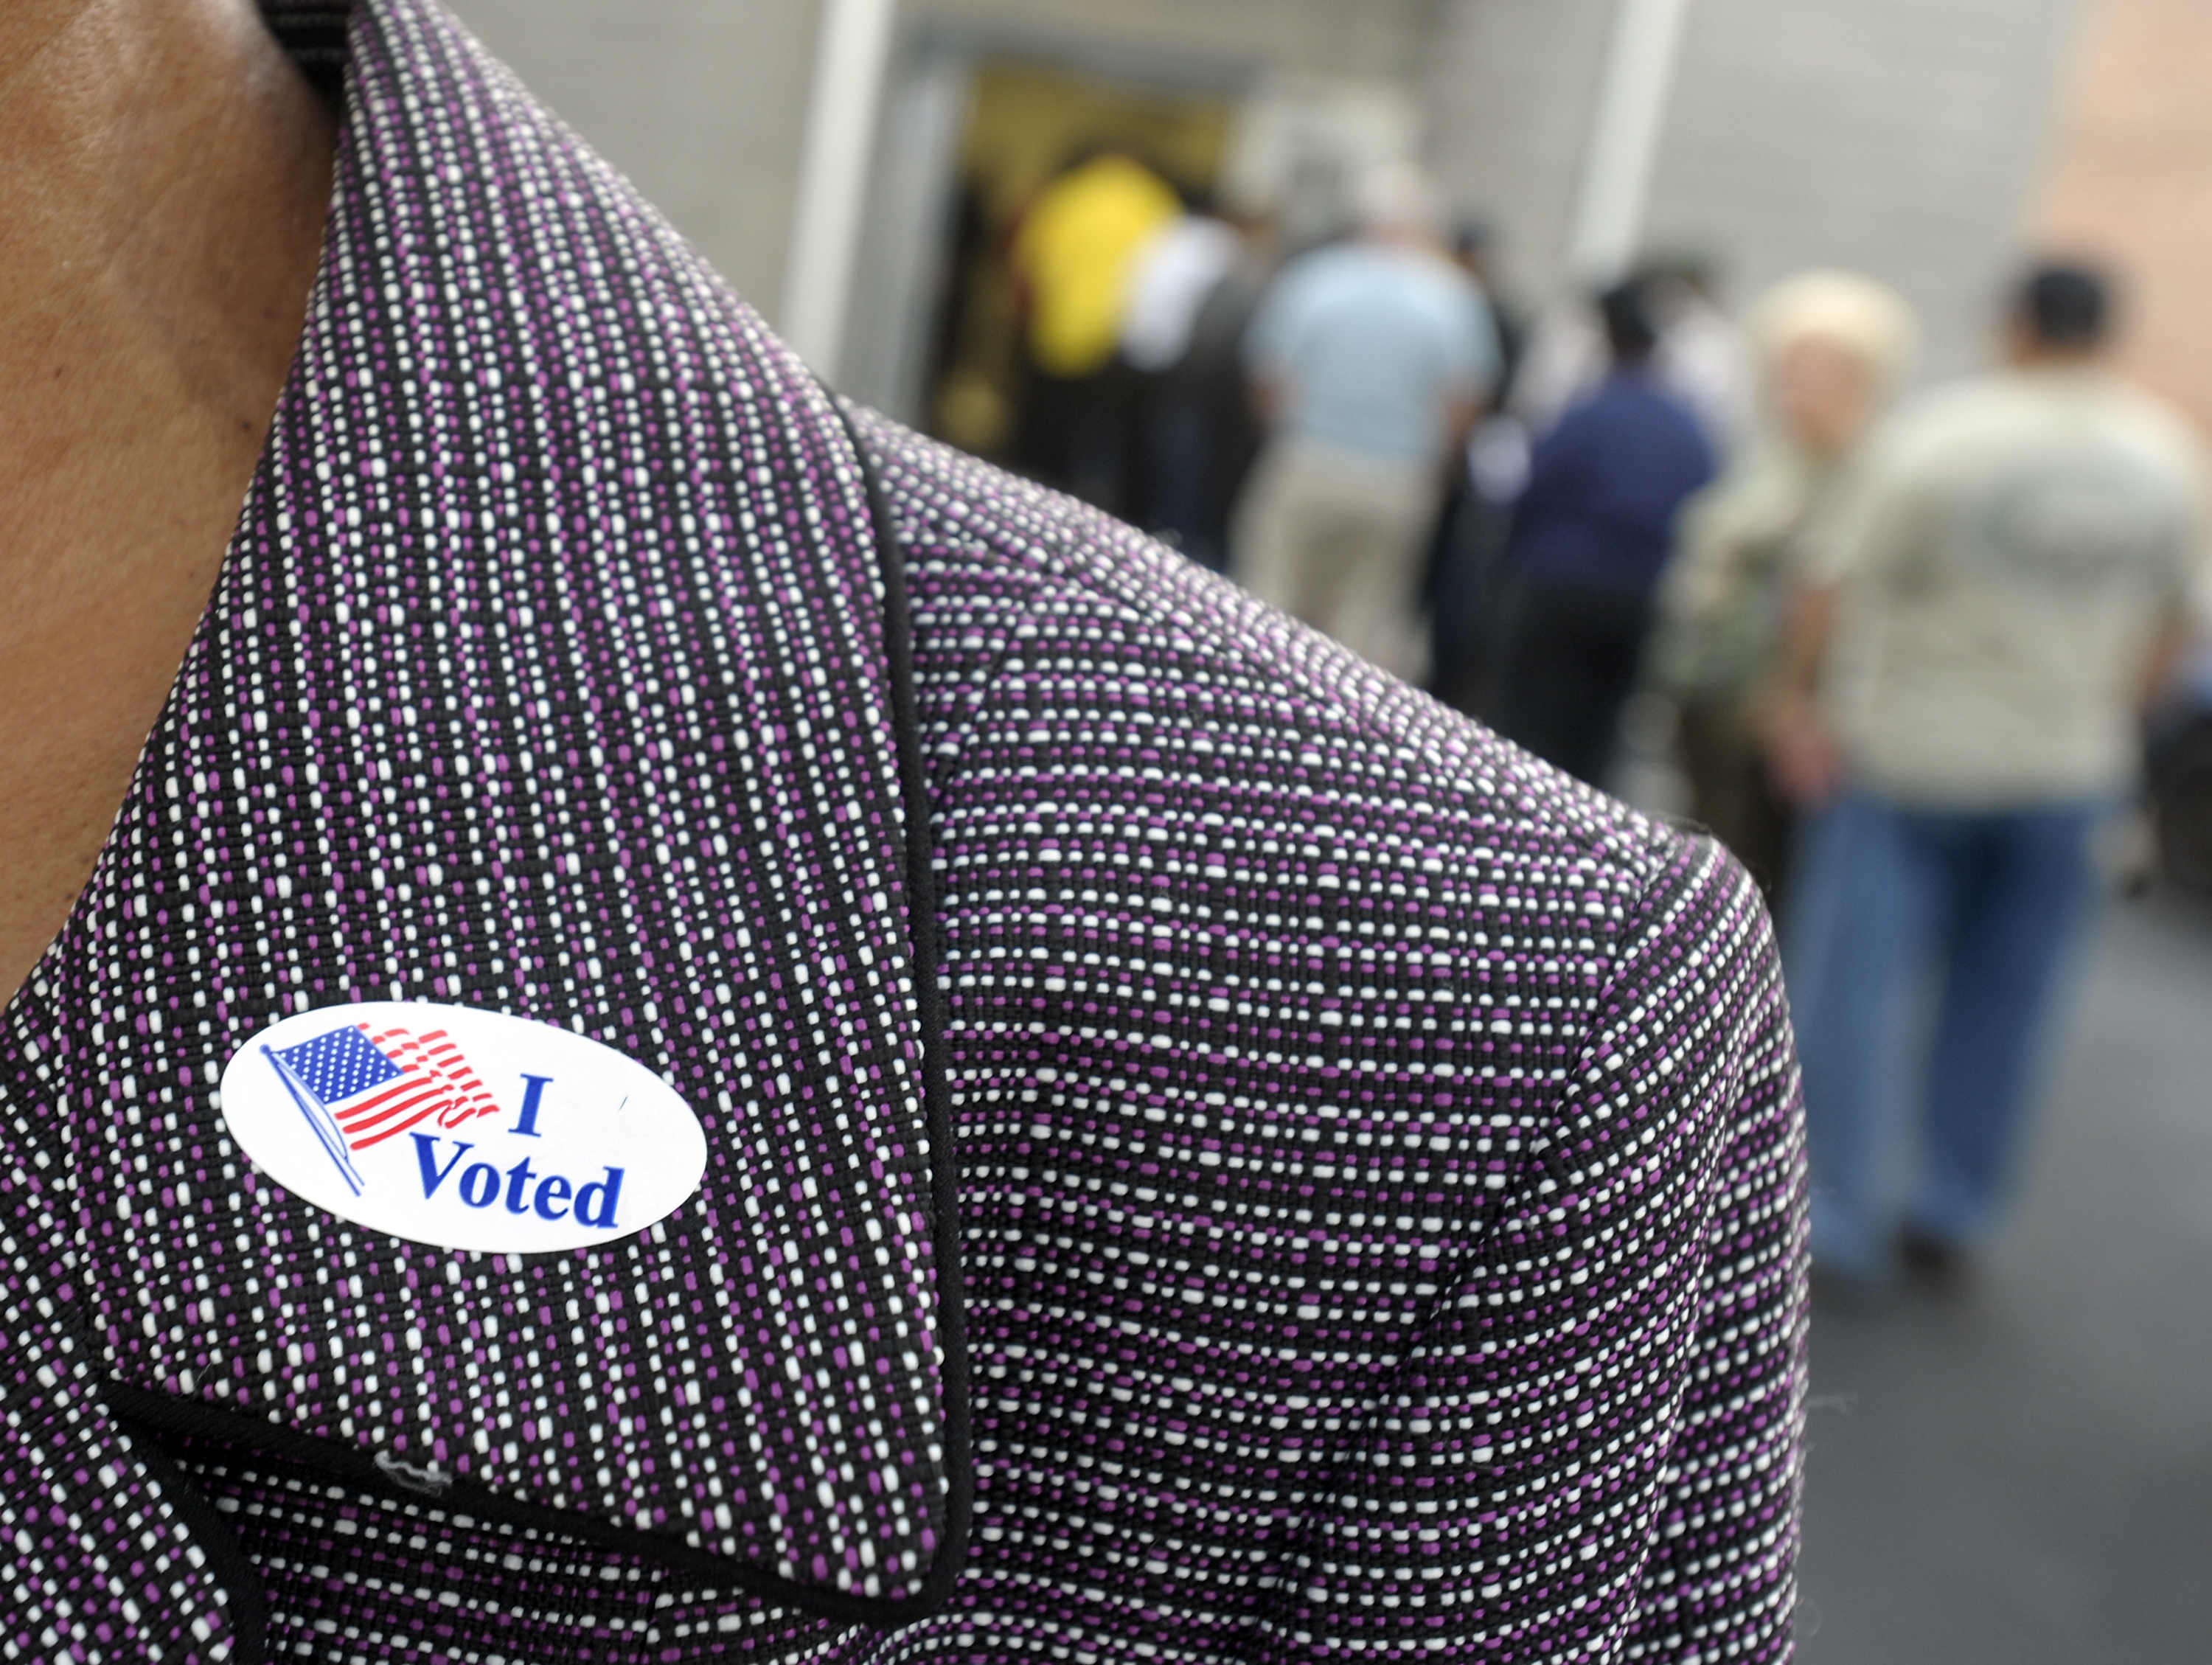 A voter displays an 